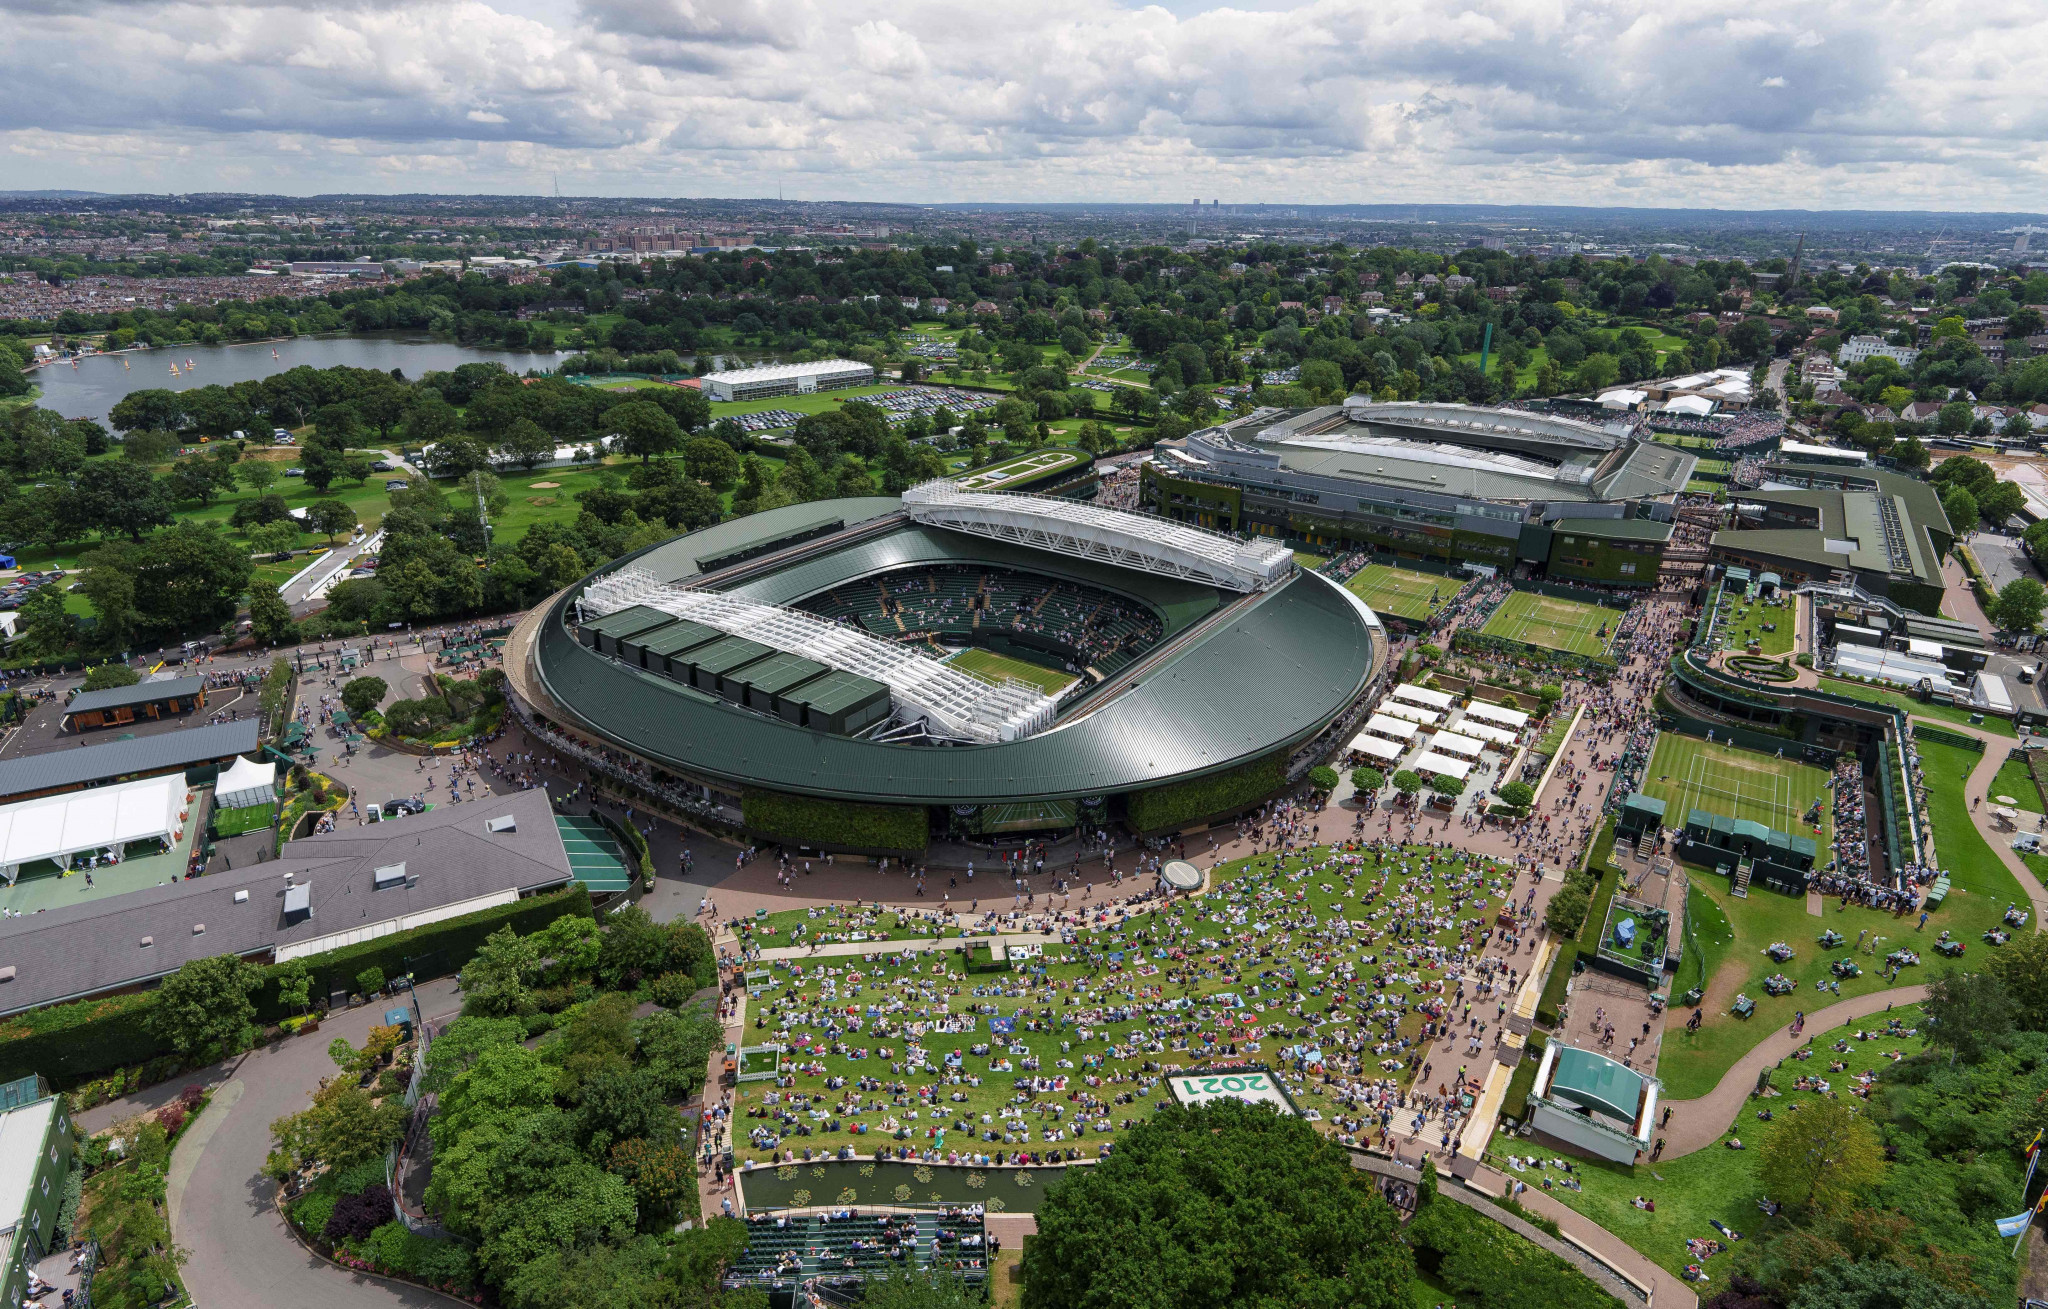 Russian and Belarusian players banned from Wimbledon over Ukraine war